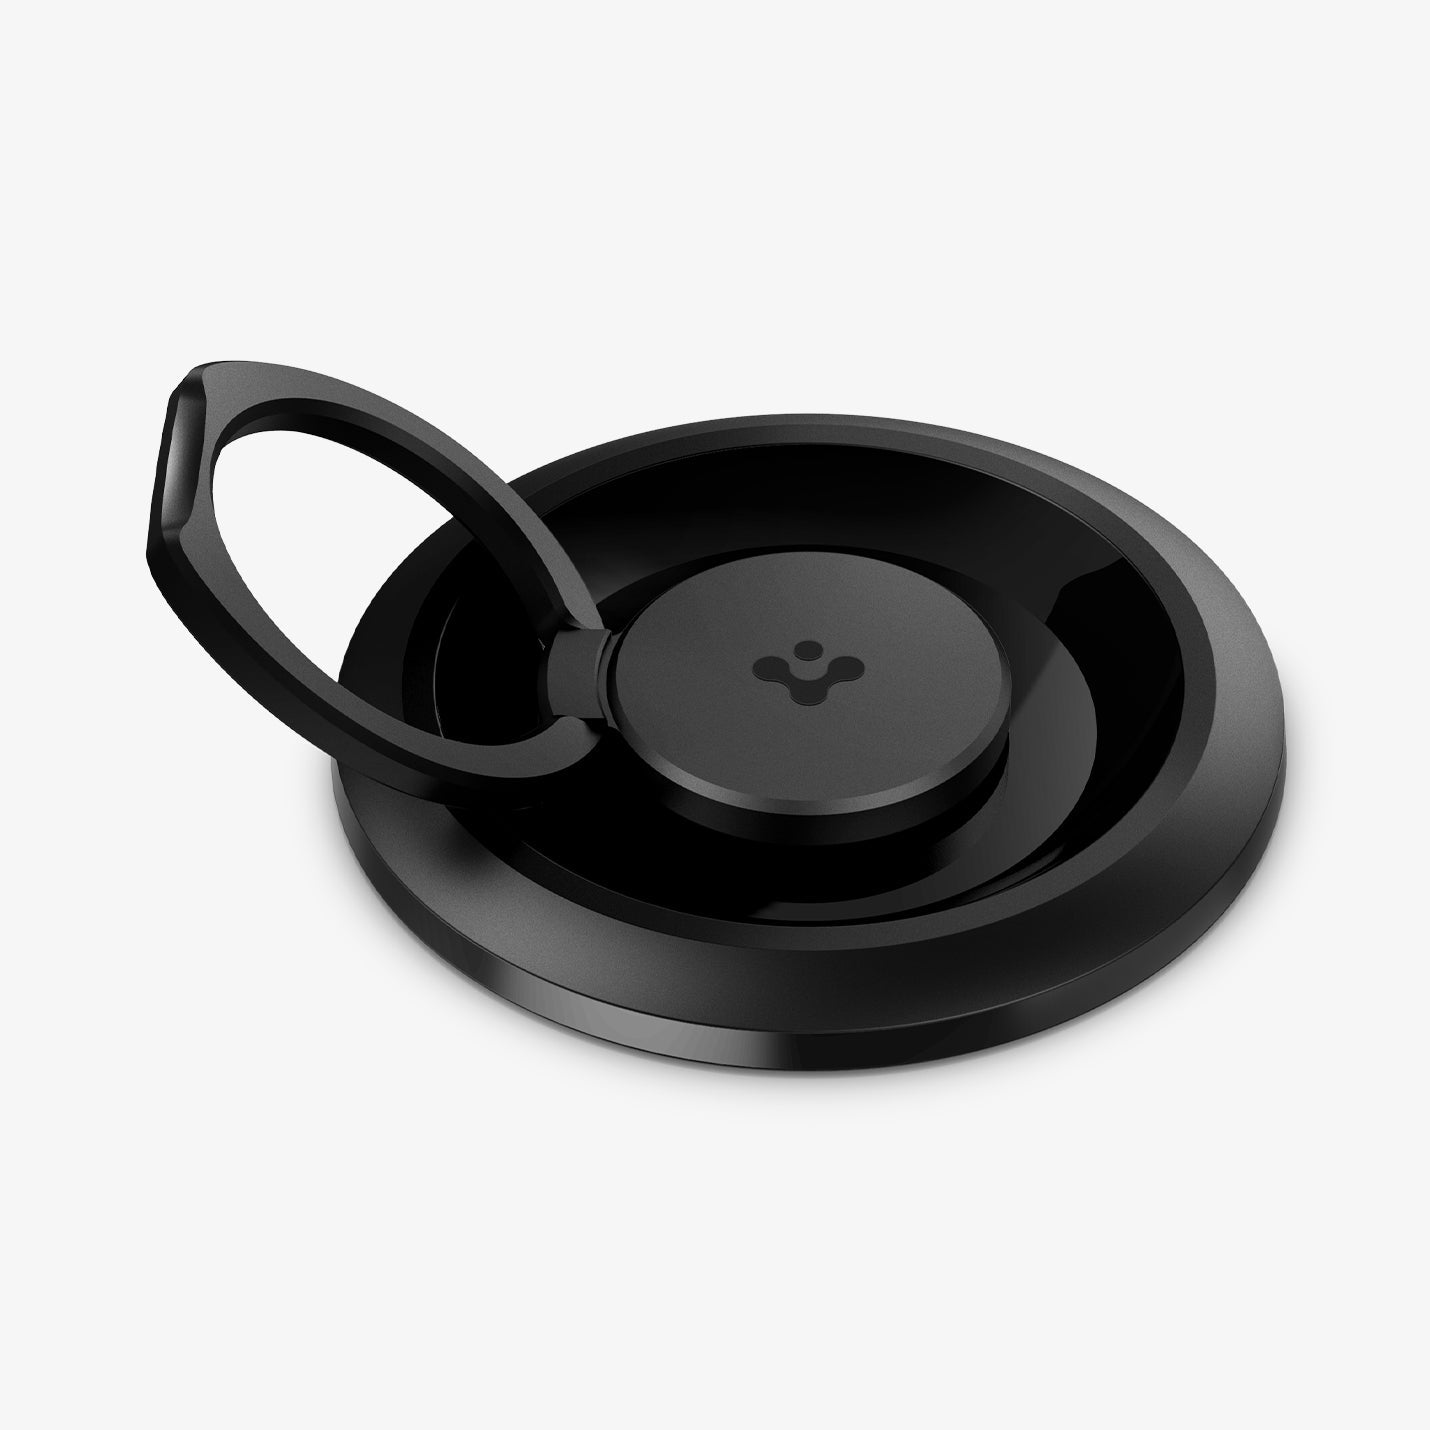 AMP03120 - O-Mag Magnetic Phone Holder (MagFit) in black showing the ring extended out and Spigen logo